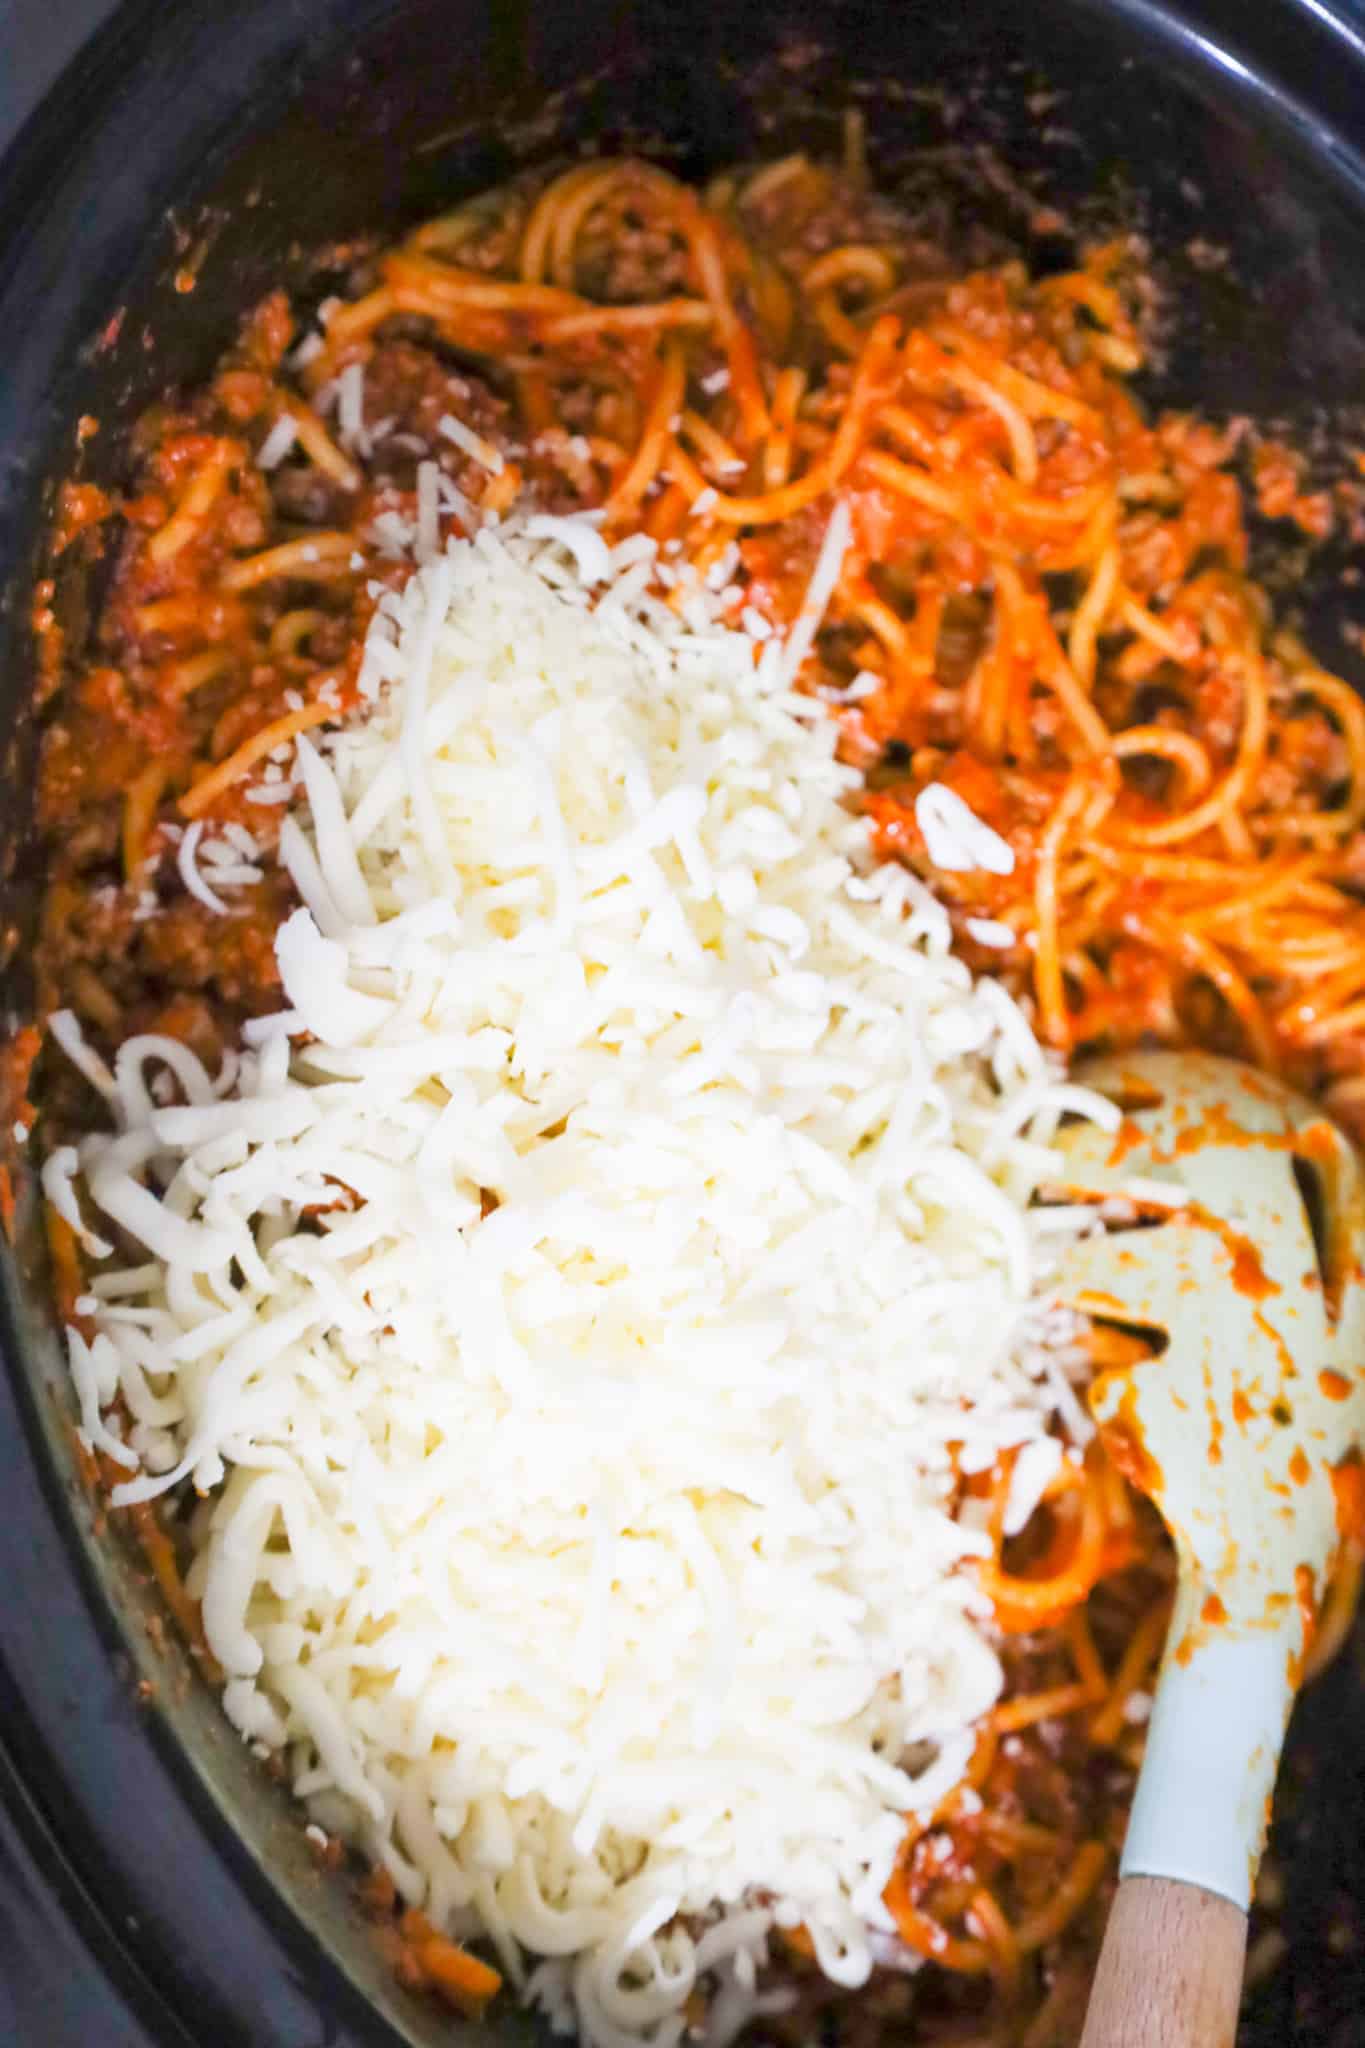 shredded mozzarella and parmesan cheese on top of spaghetti and meat sauce in a crock pot